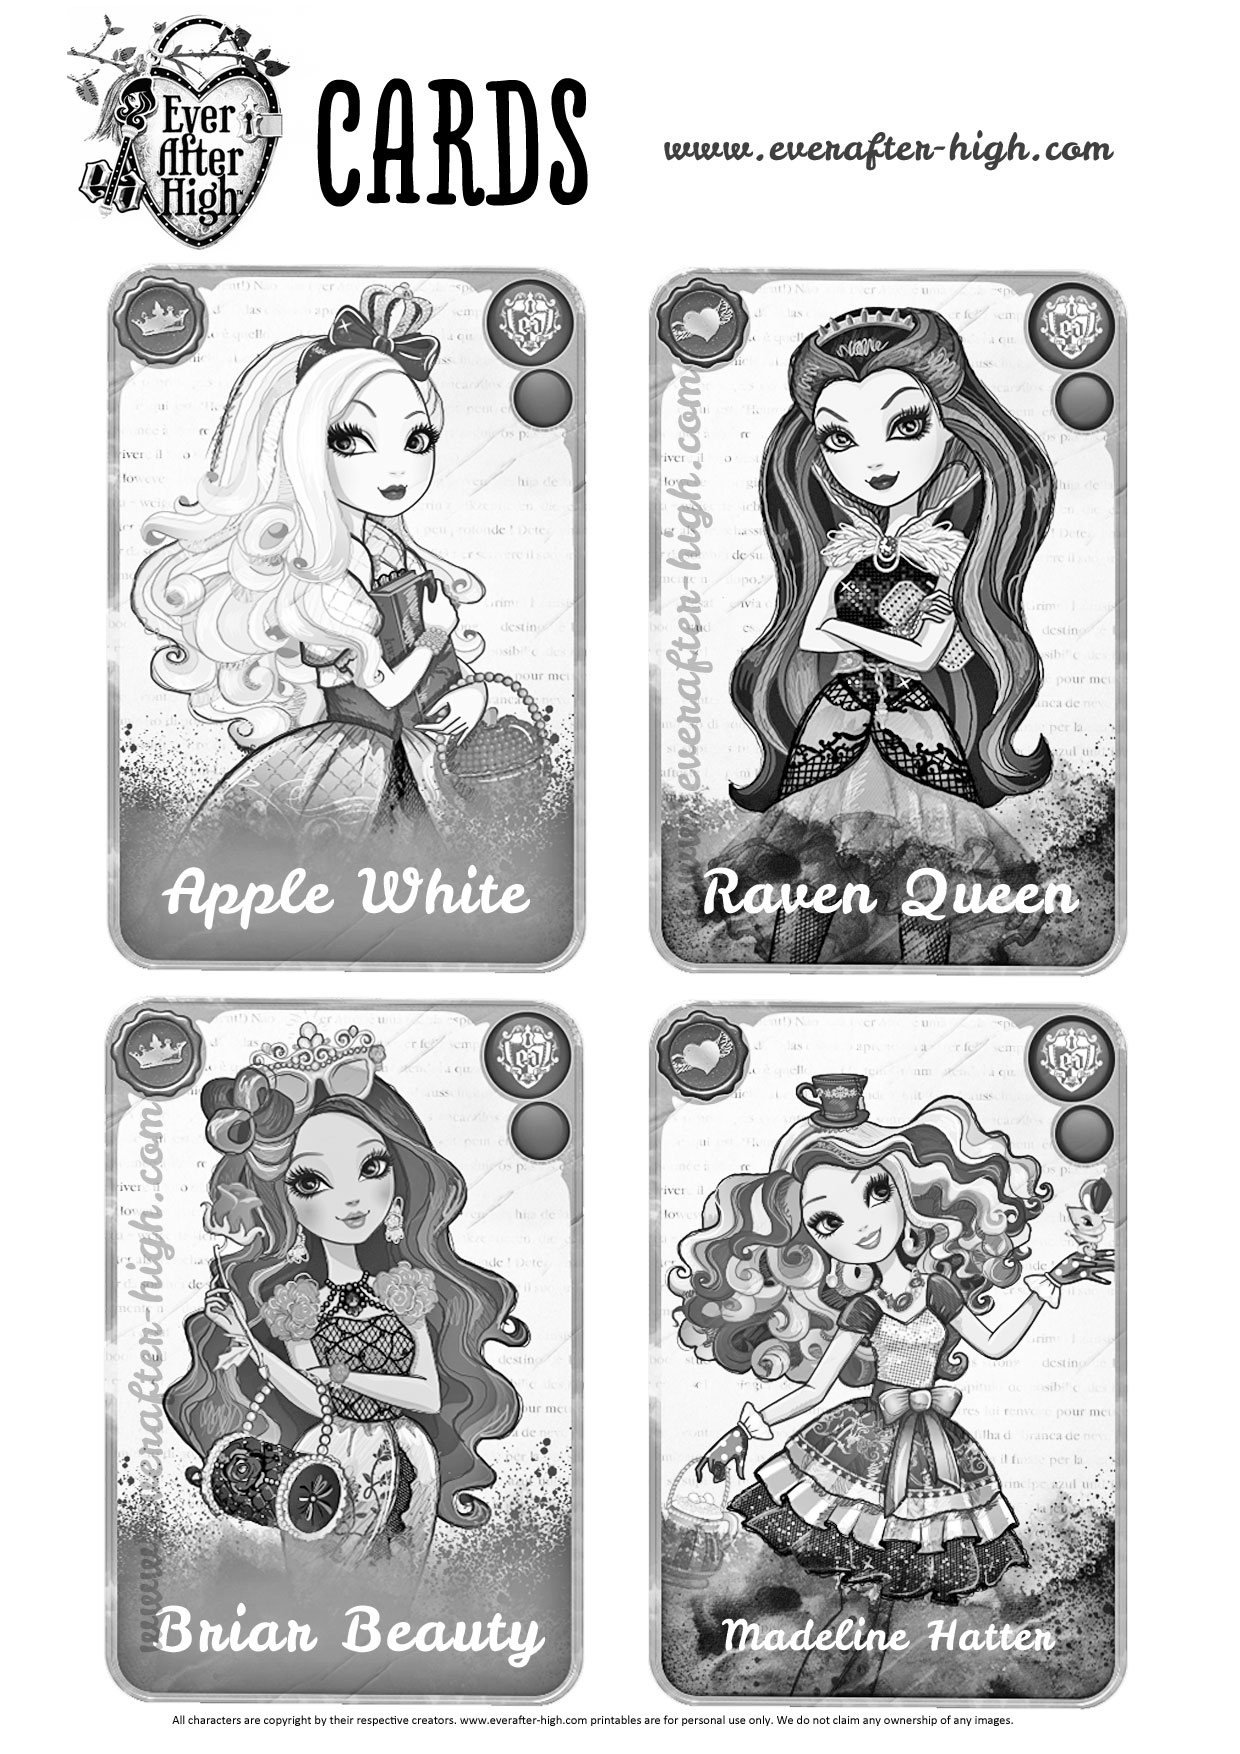 Madeline Coloring Pages Printable Ever After High For Kids Ever After High Kids Coloring Pages